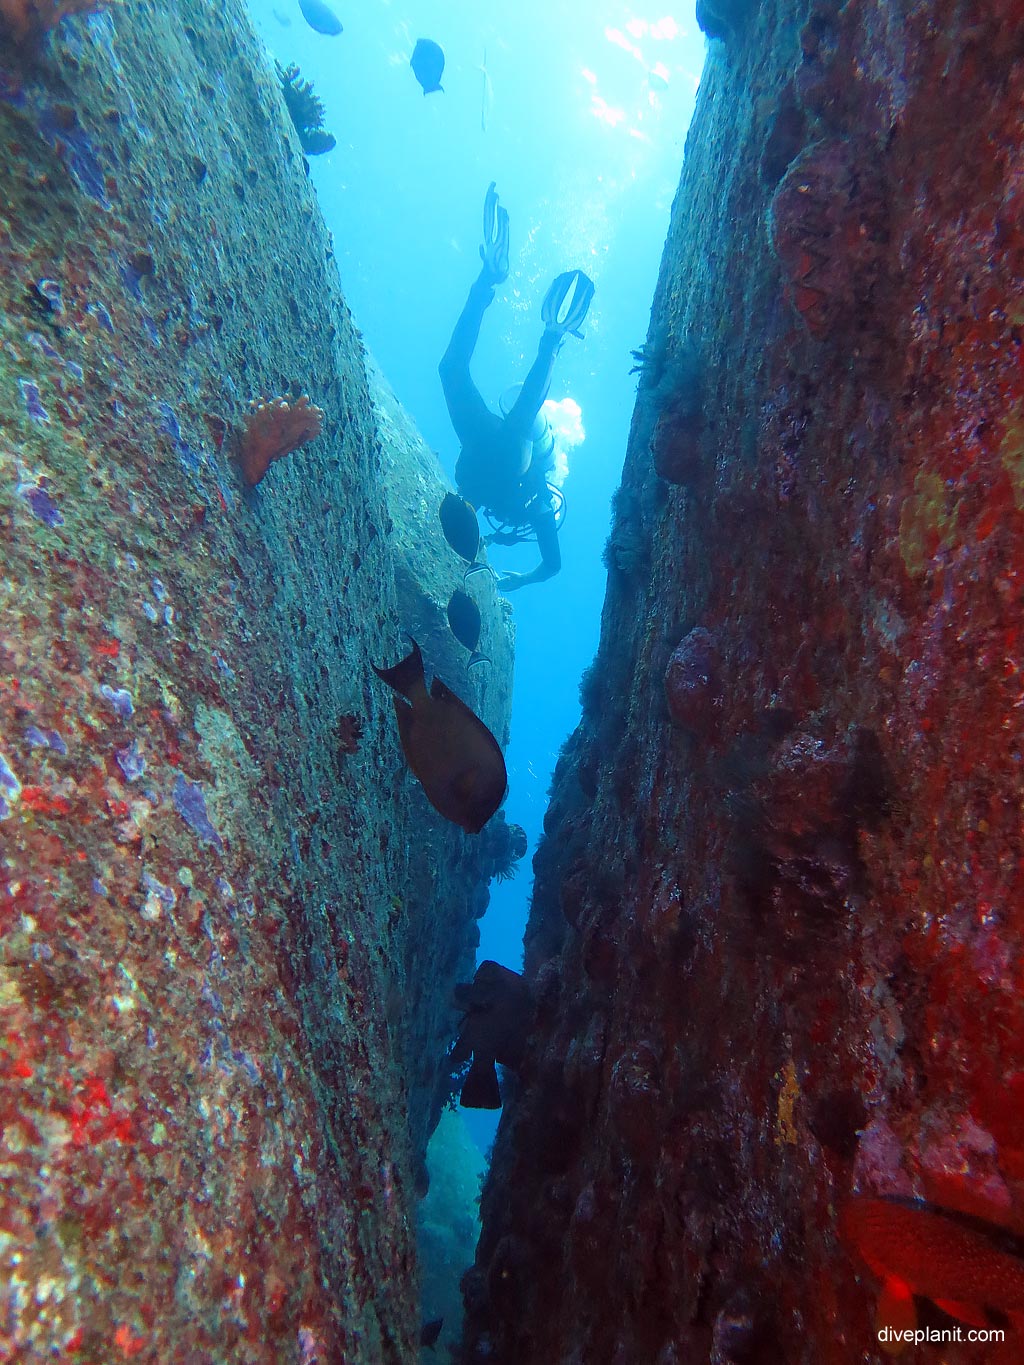 Diver in the gap between the boulders at Ko Bangu North Point diving with Sea Bees. Scuba holiday travel planning for Thailand - where, who and how